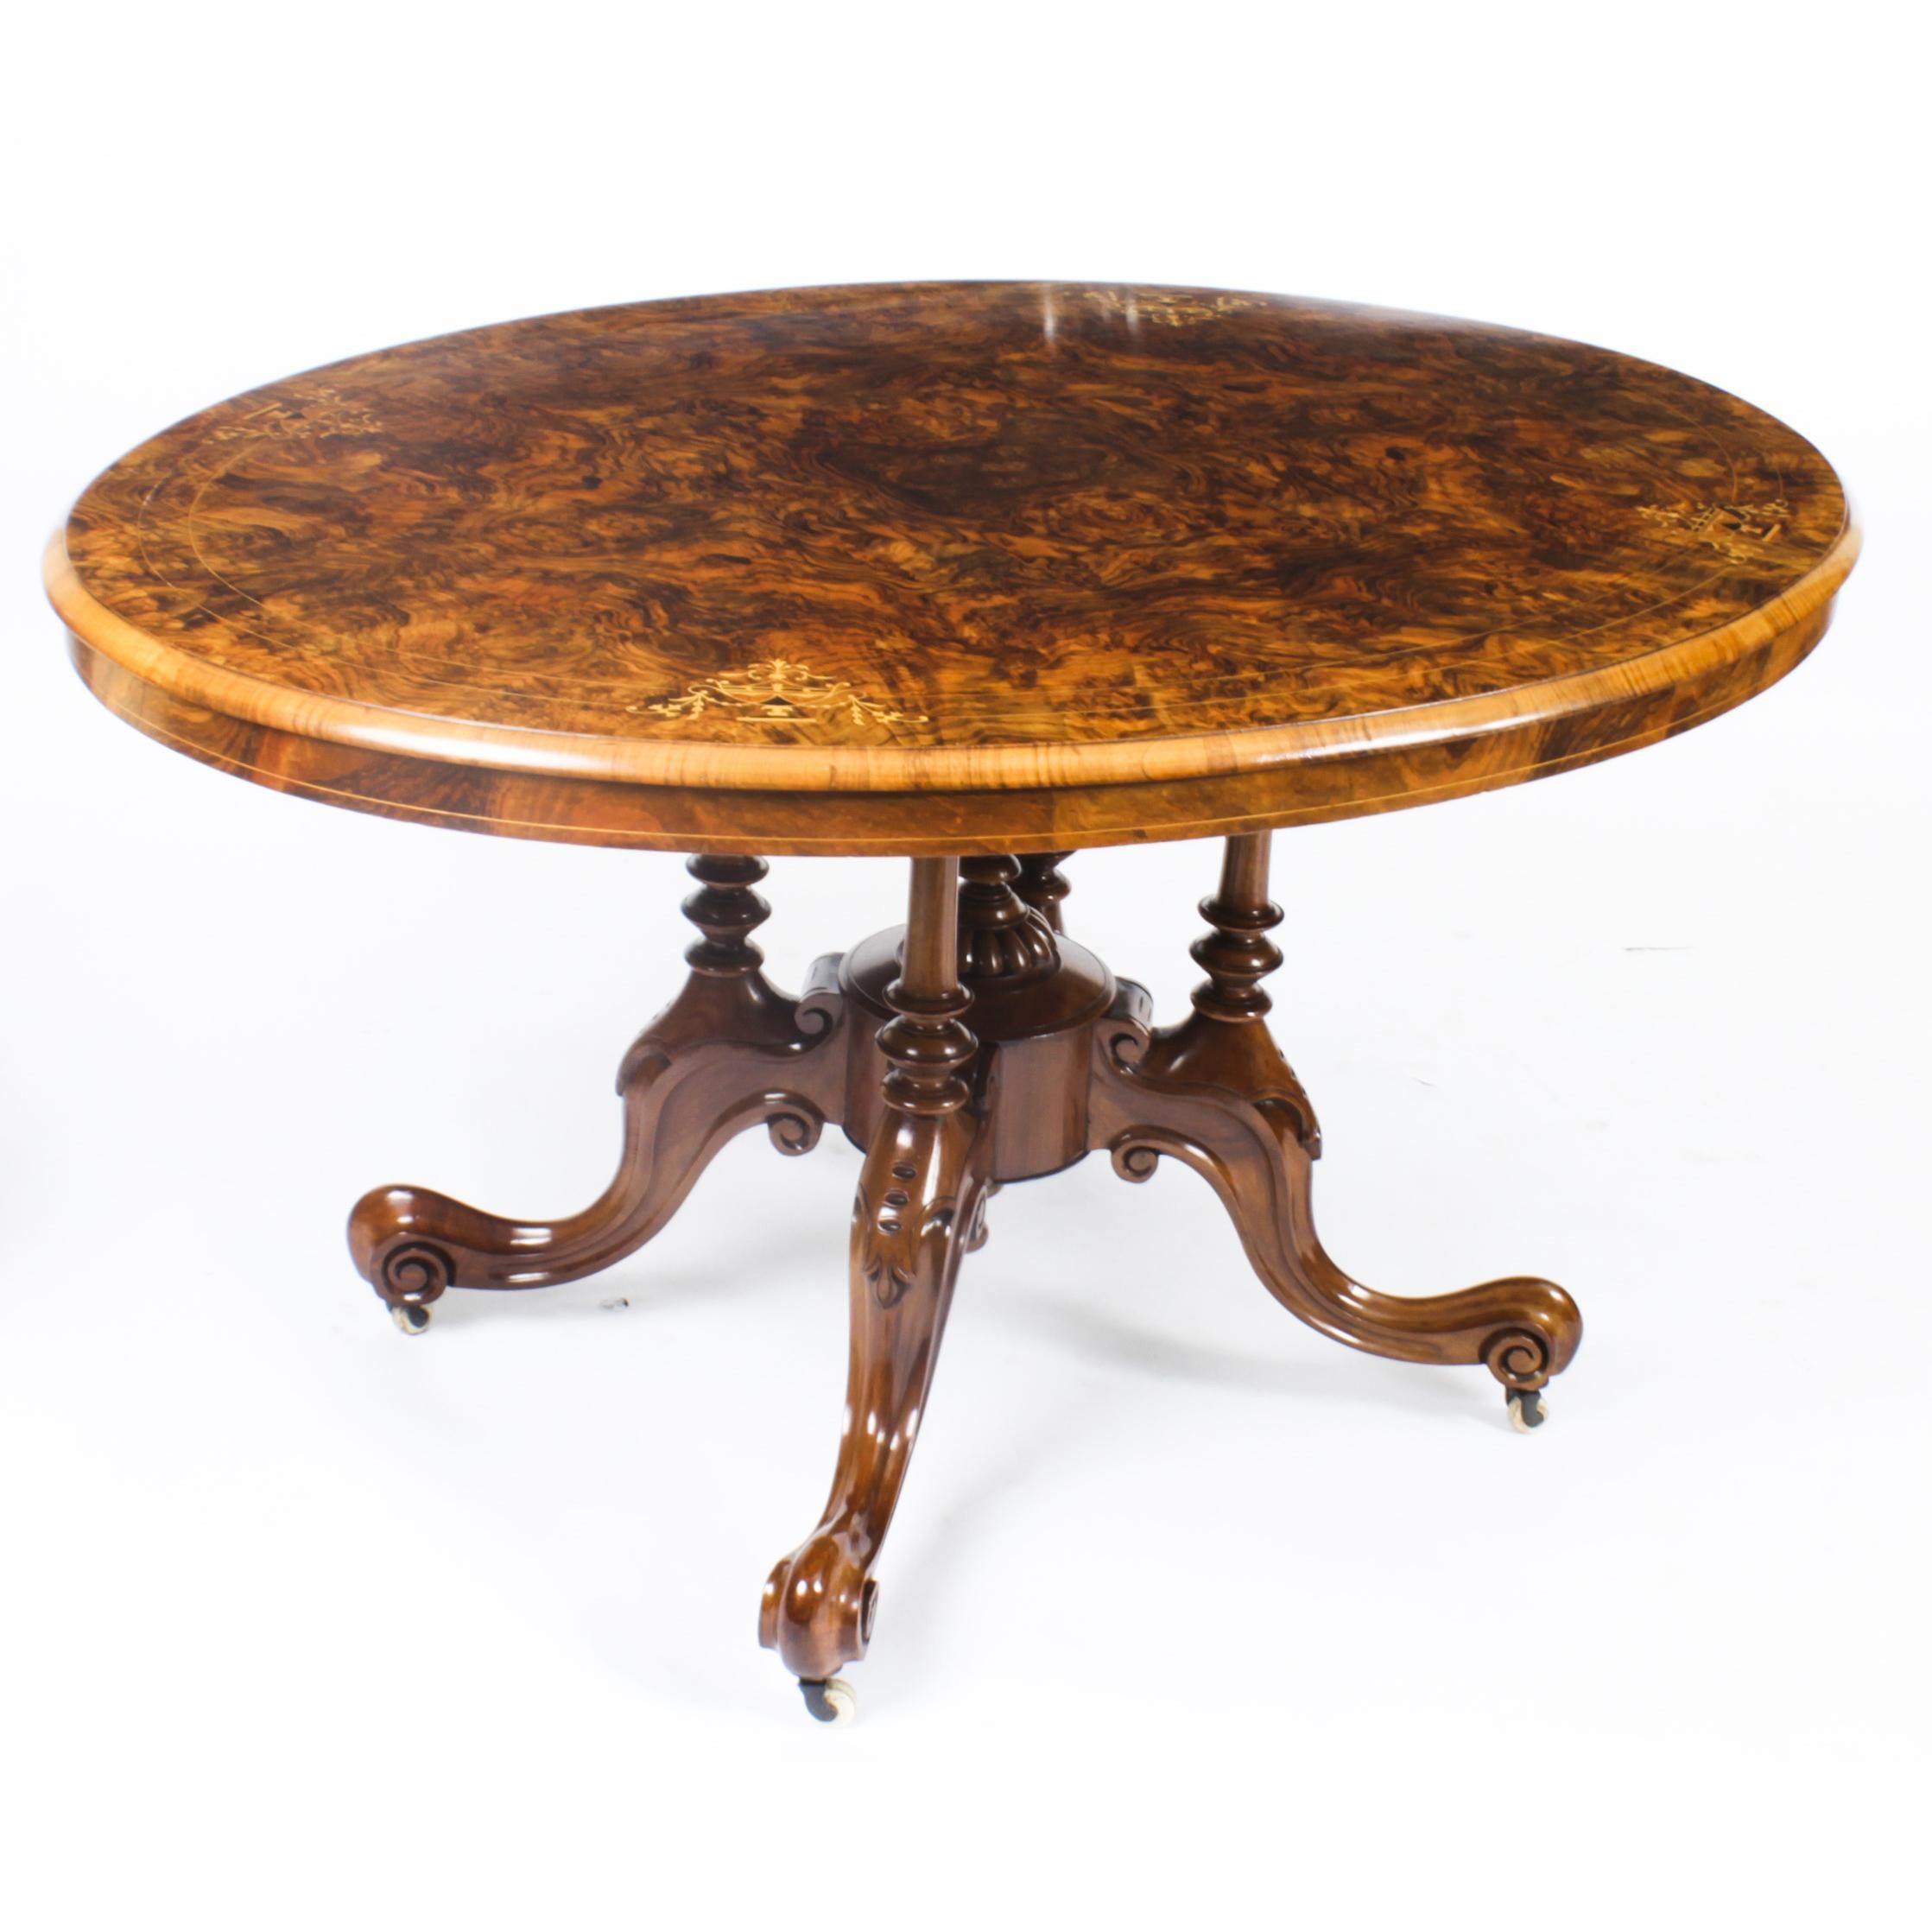 This is a superb large Victorian oval burr walnut Loo table, circa 1860 in date, with a set of four vintage balloon back chairs.
 
The beautifully figured quarter veneered oval tilt top table features superb marquetry inlaid decoration, a wonderful